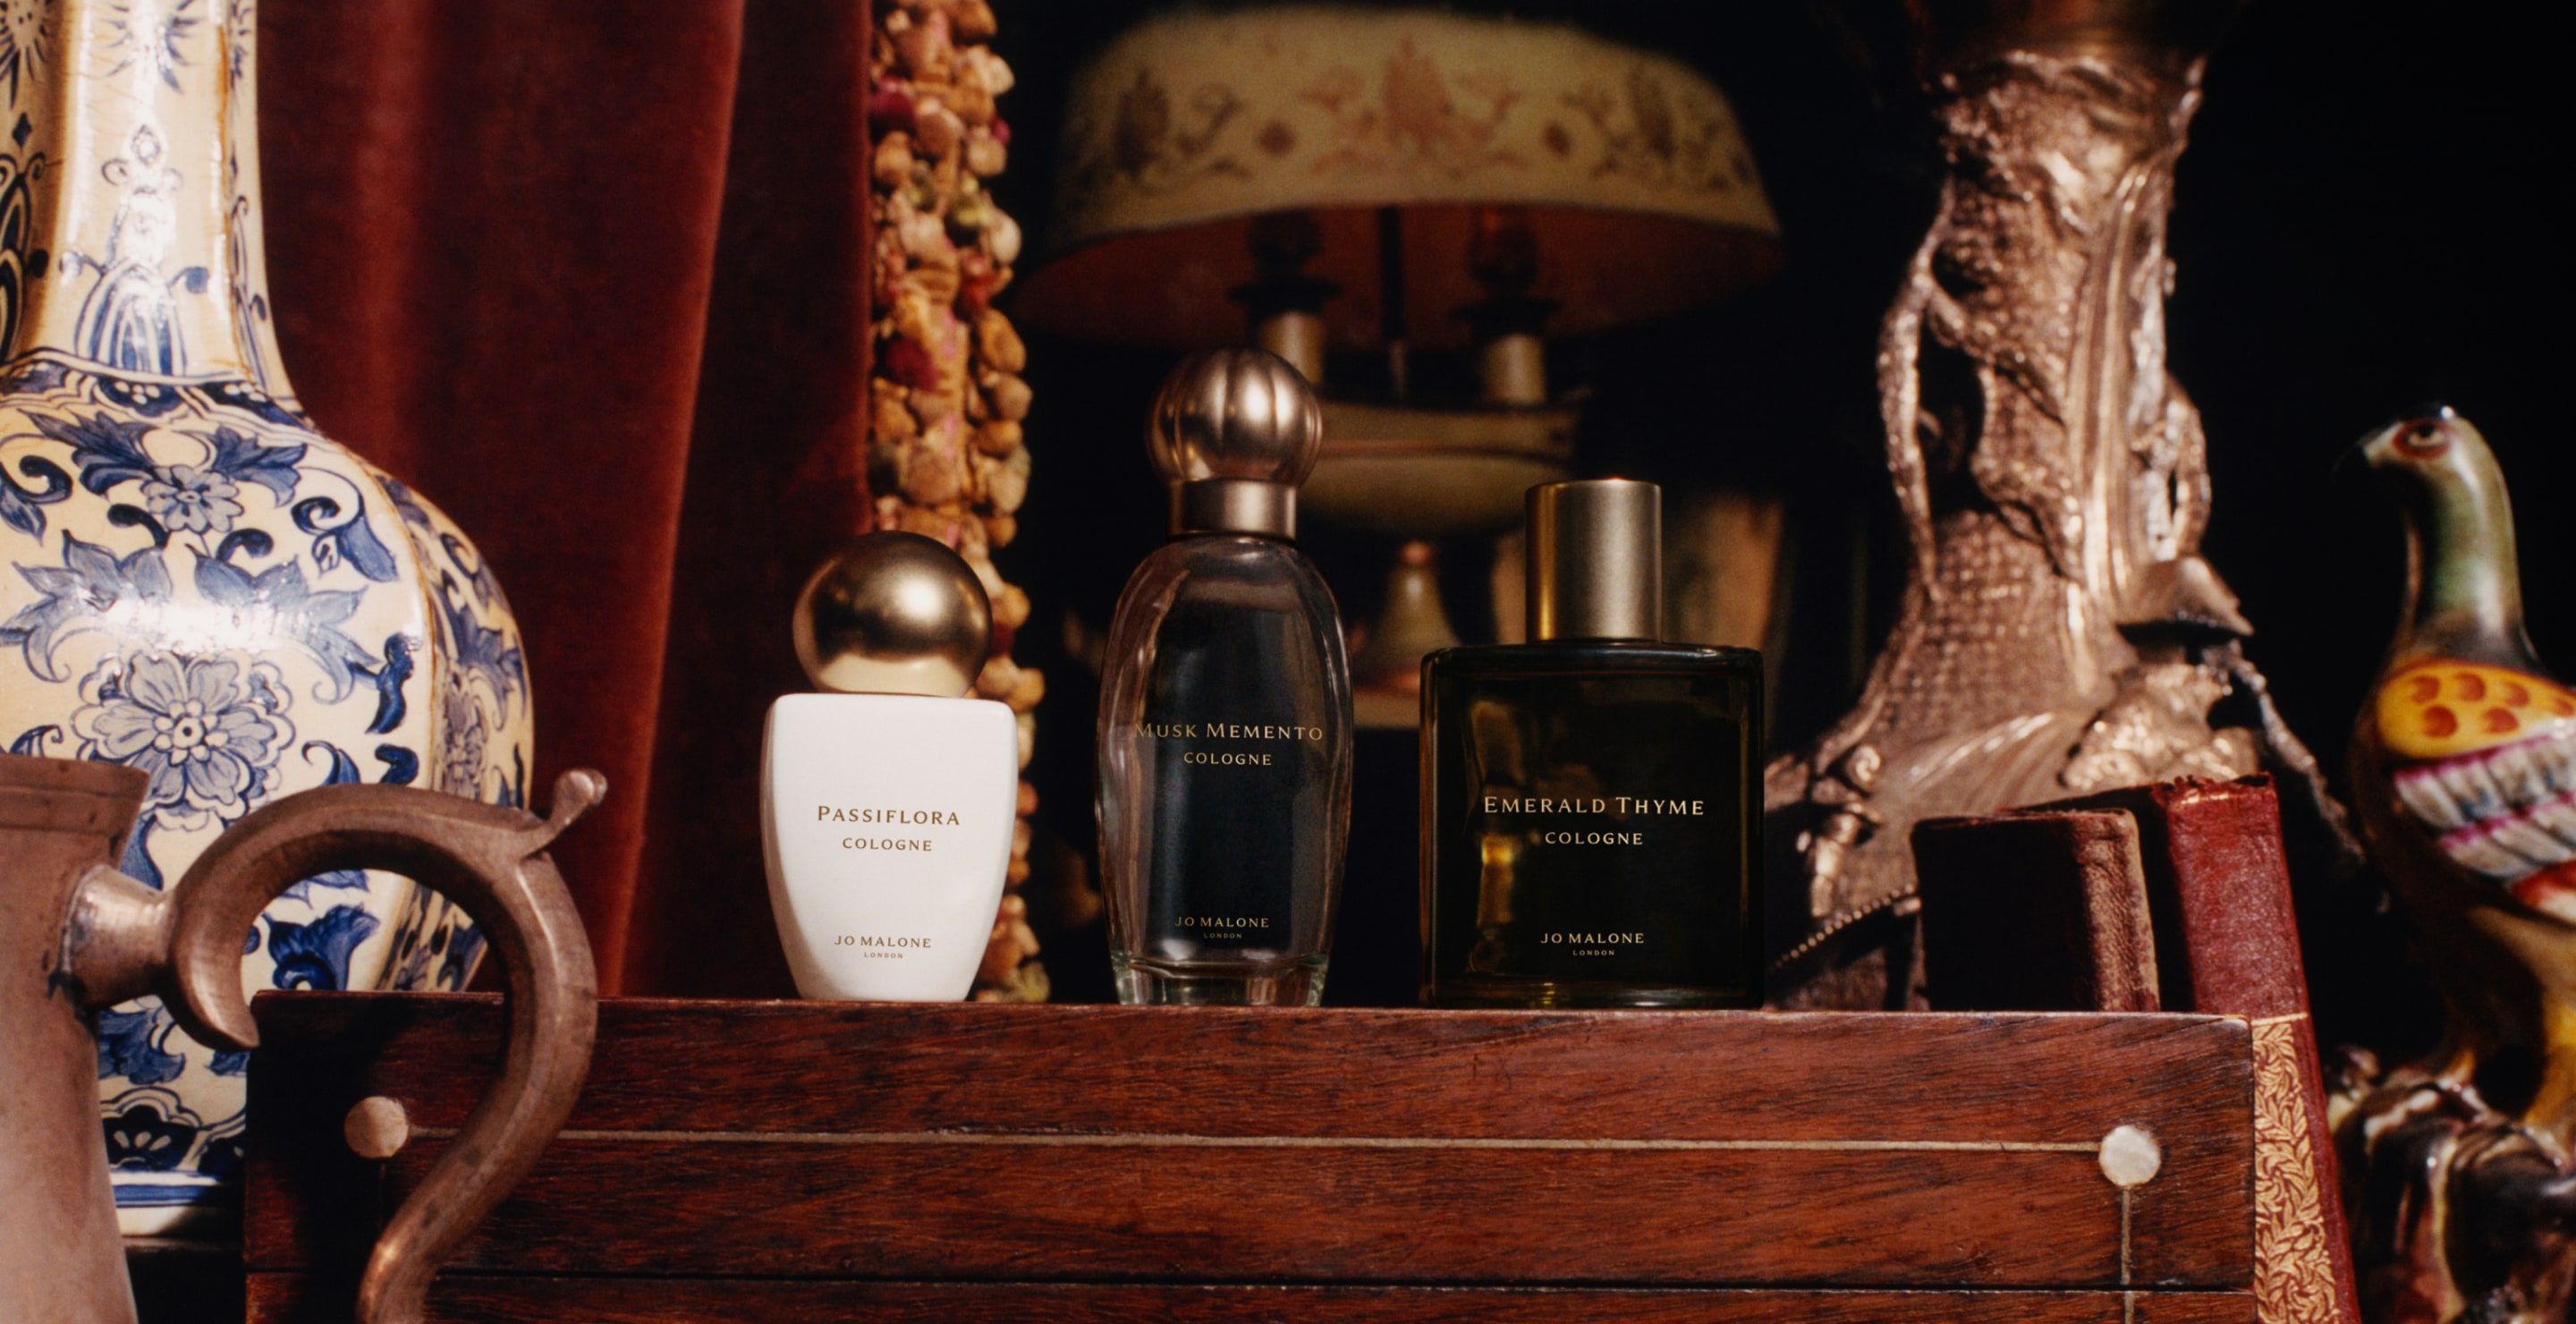 Jo Malone London scented momentos collection video featuring antique collecting